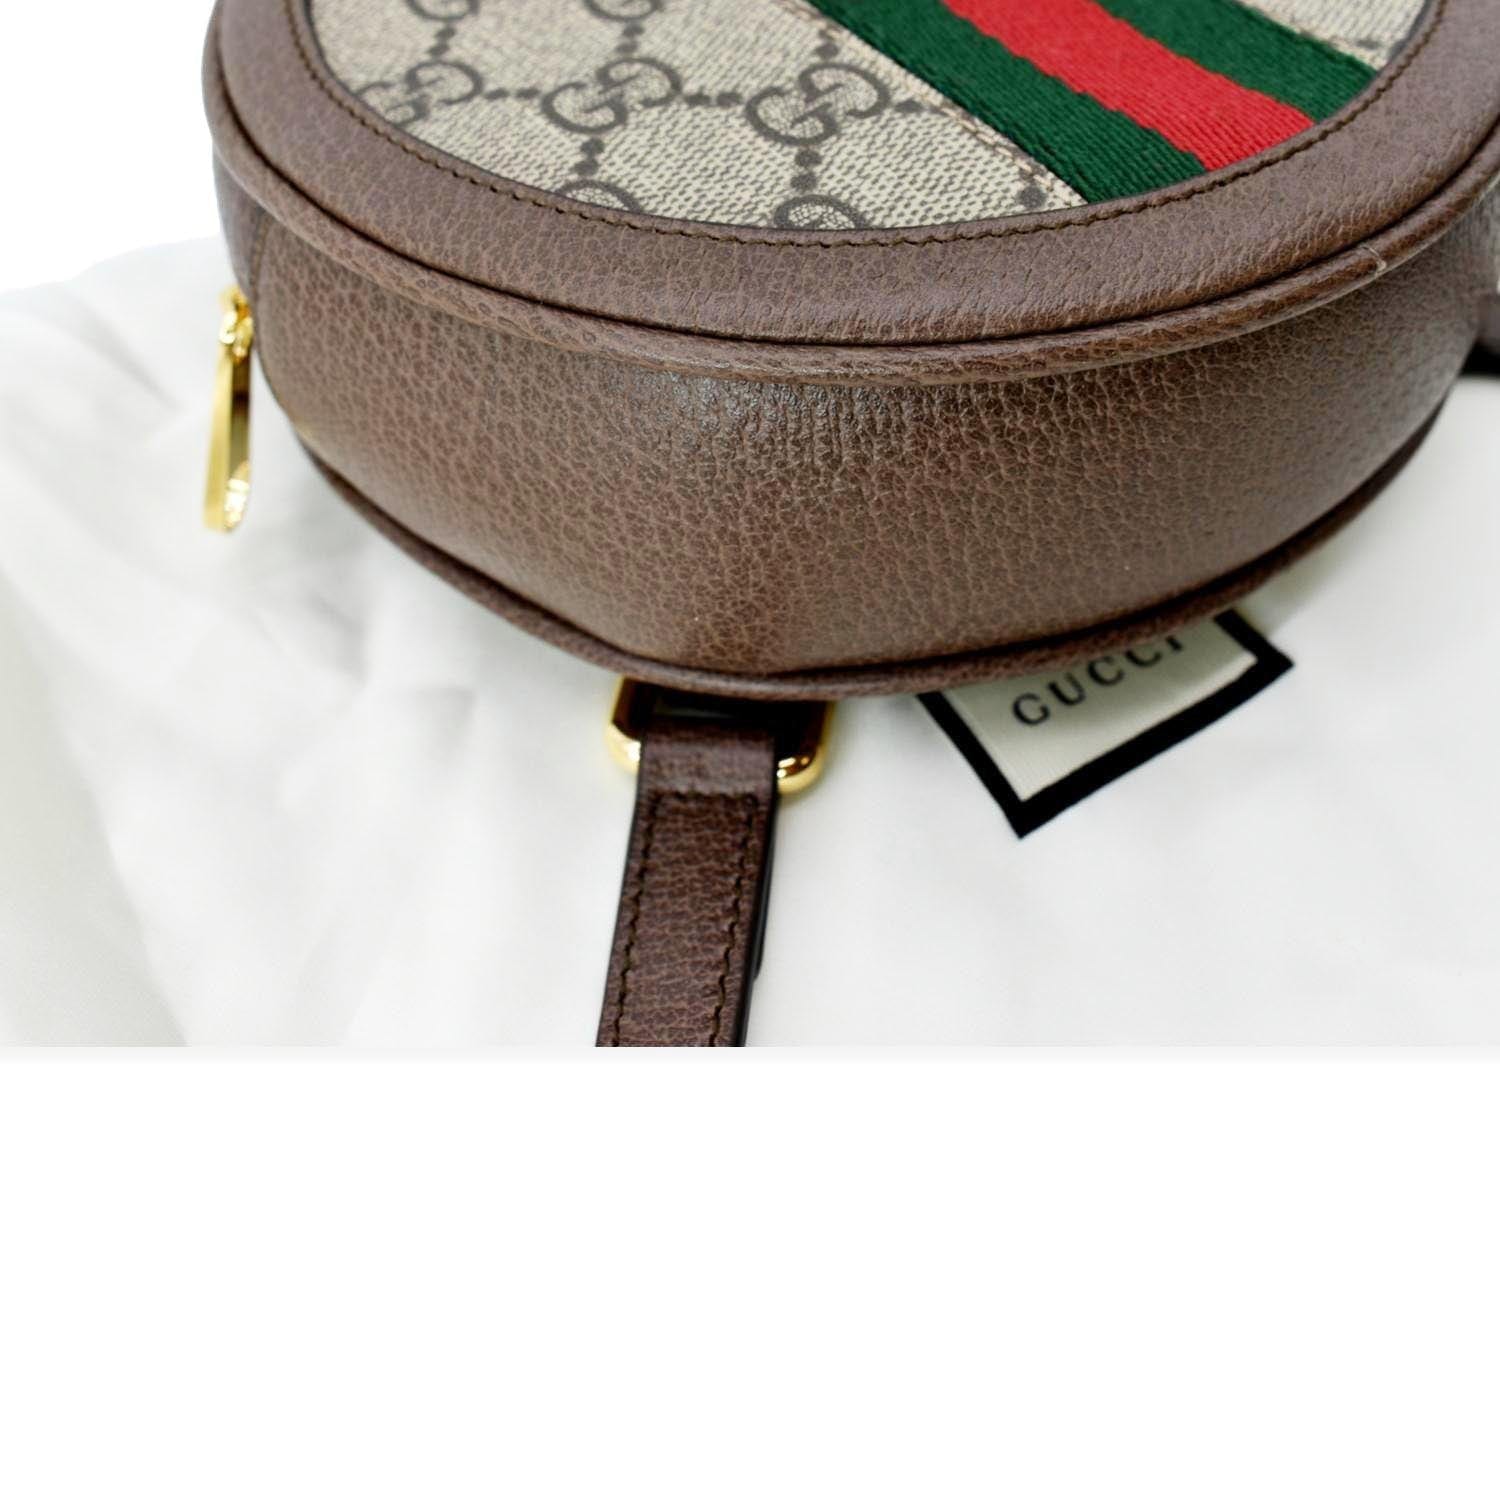 GUCCI OPHIDIA BELT BAG REVIEW  EVERYTHING THAT FITS AND MODELLING SHOTS 